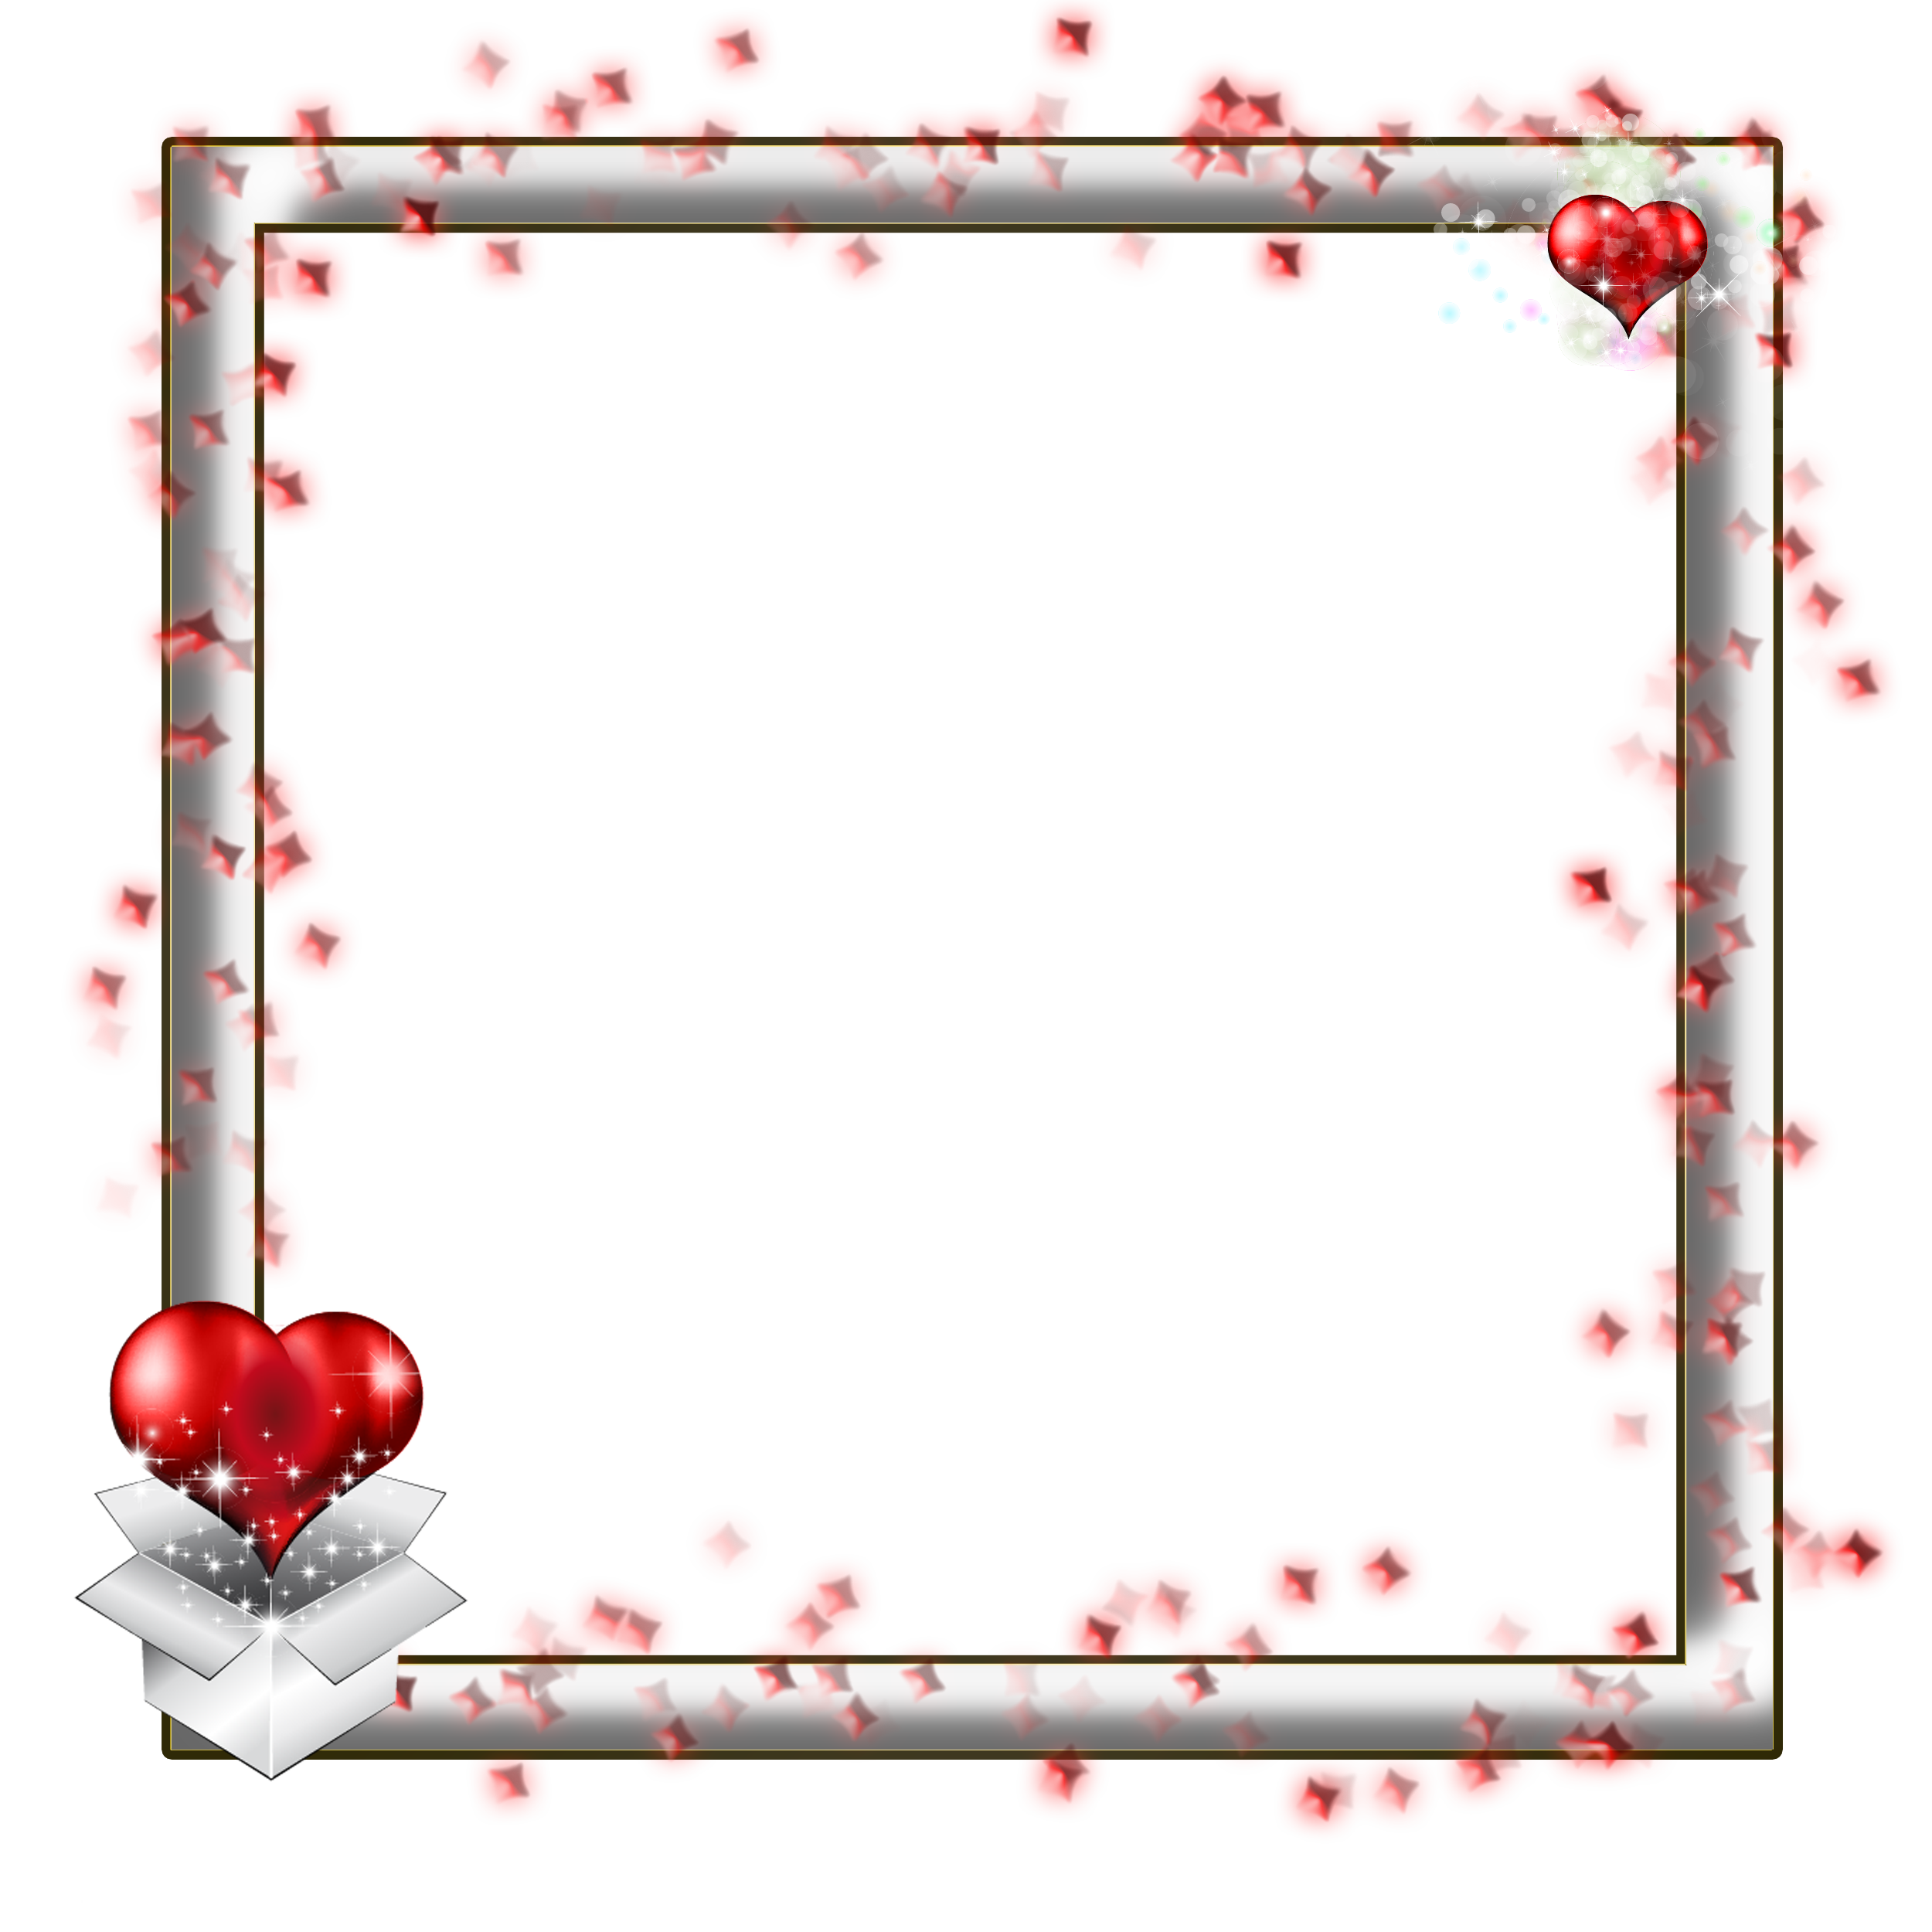 Picture Frame Love HD Image Free PNG Clipart